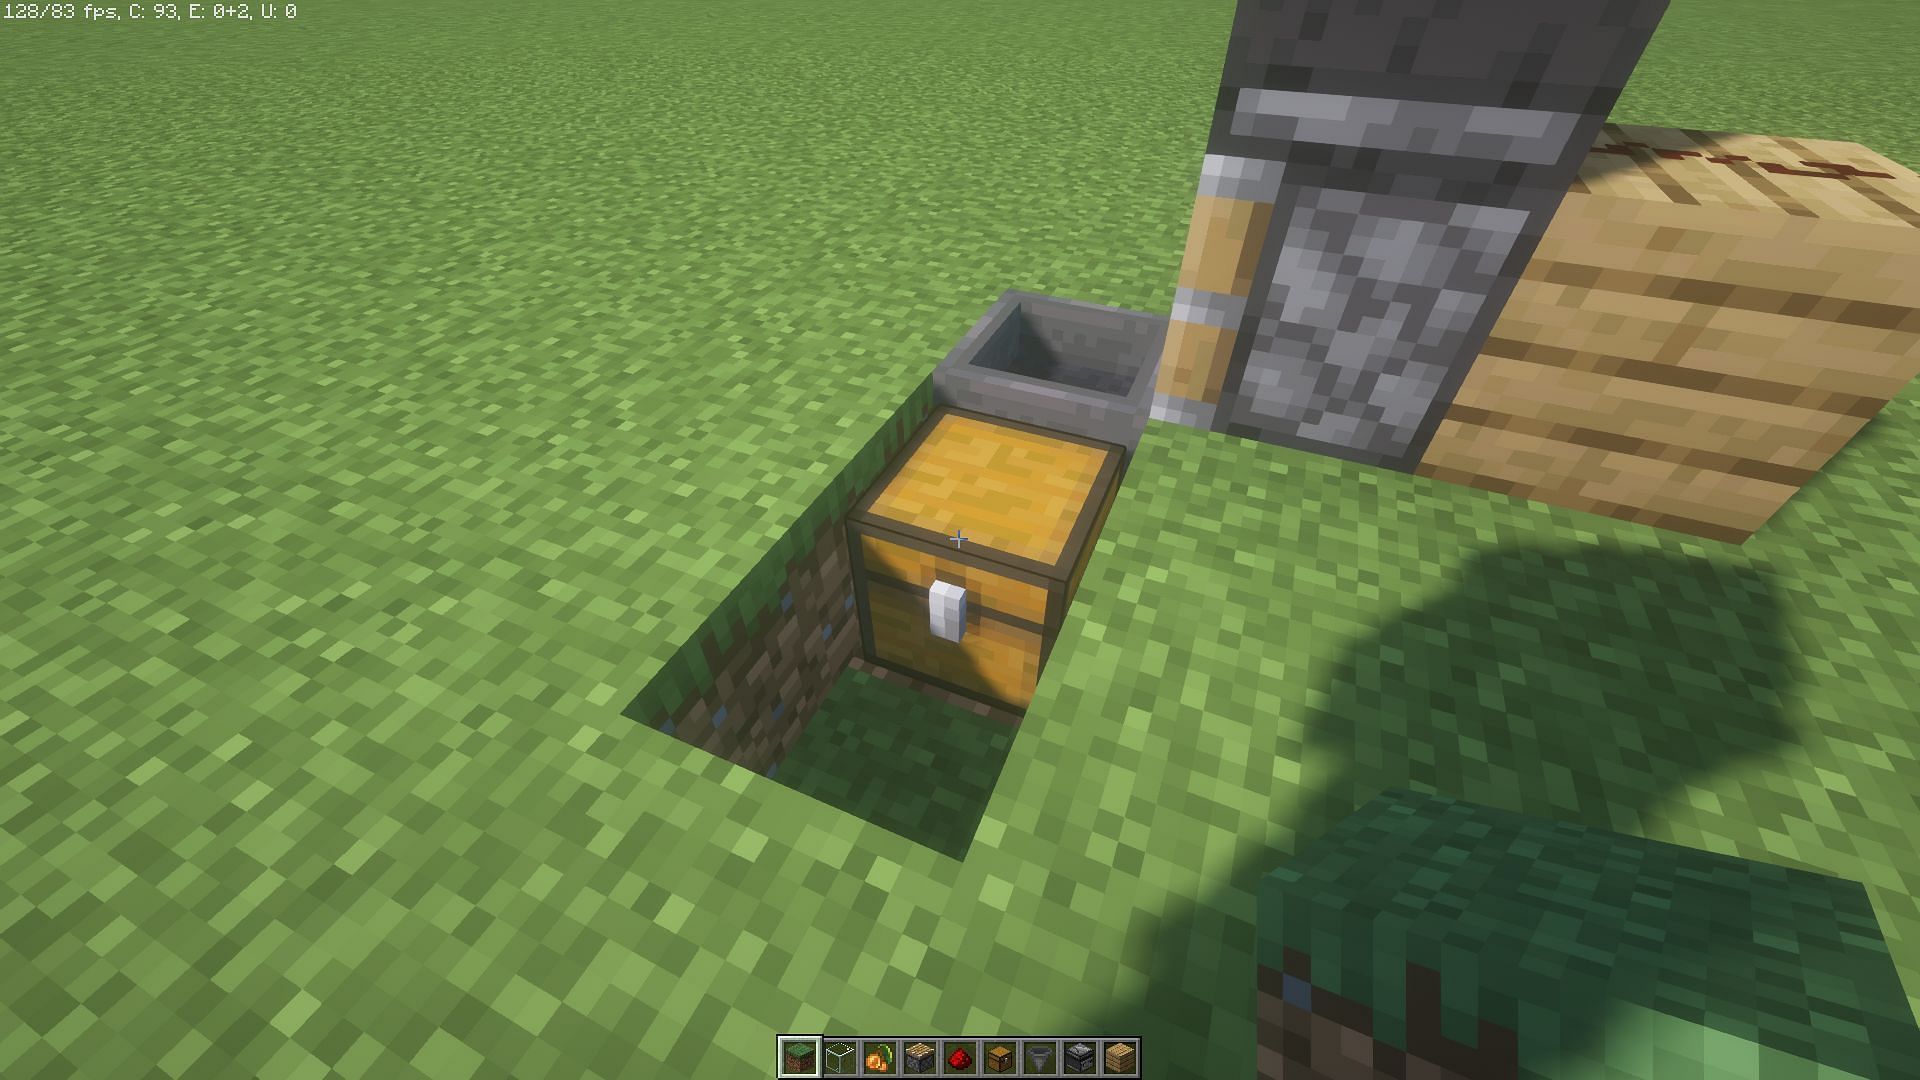 Hopper and chest that will gather the items (Image via Mojang)